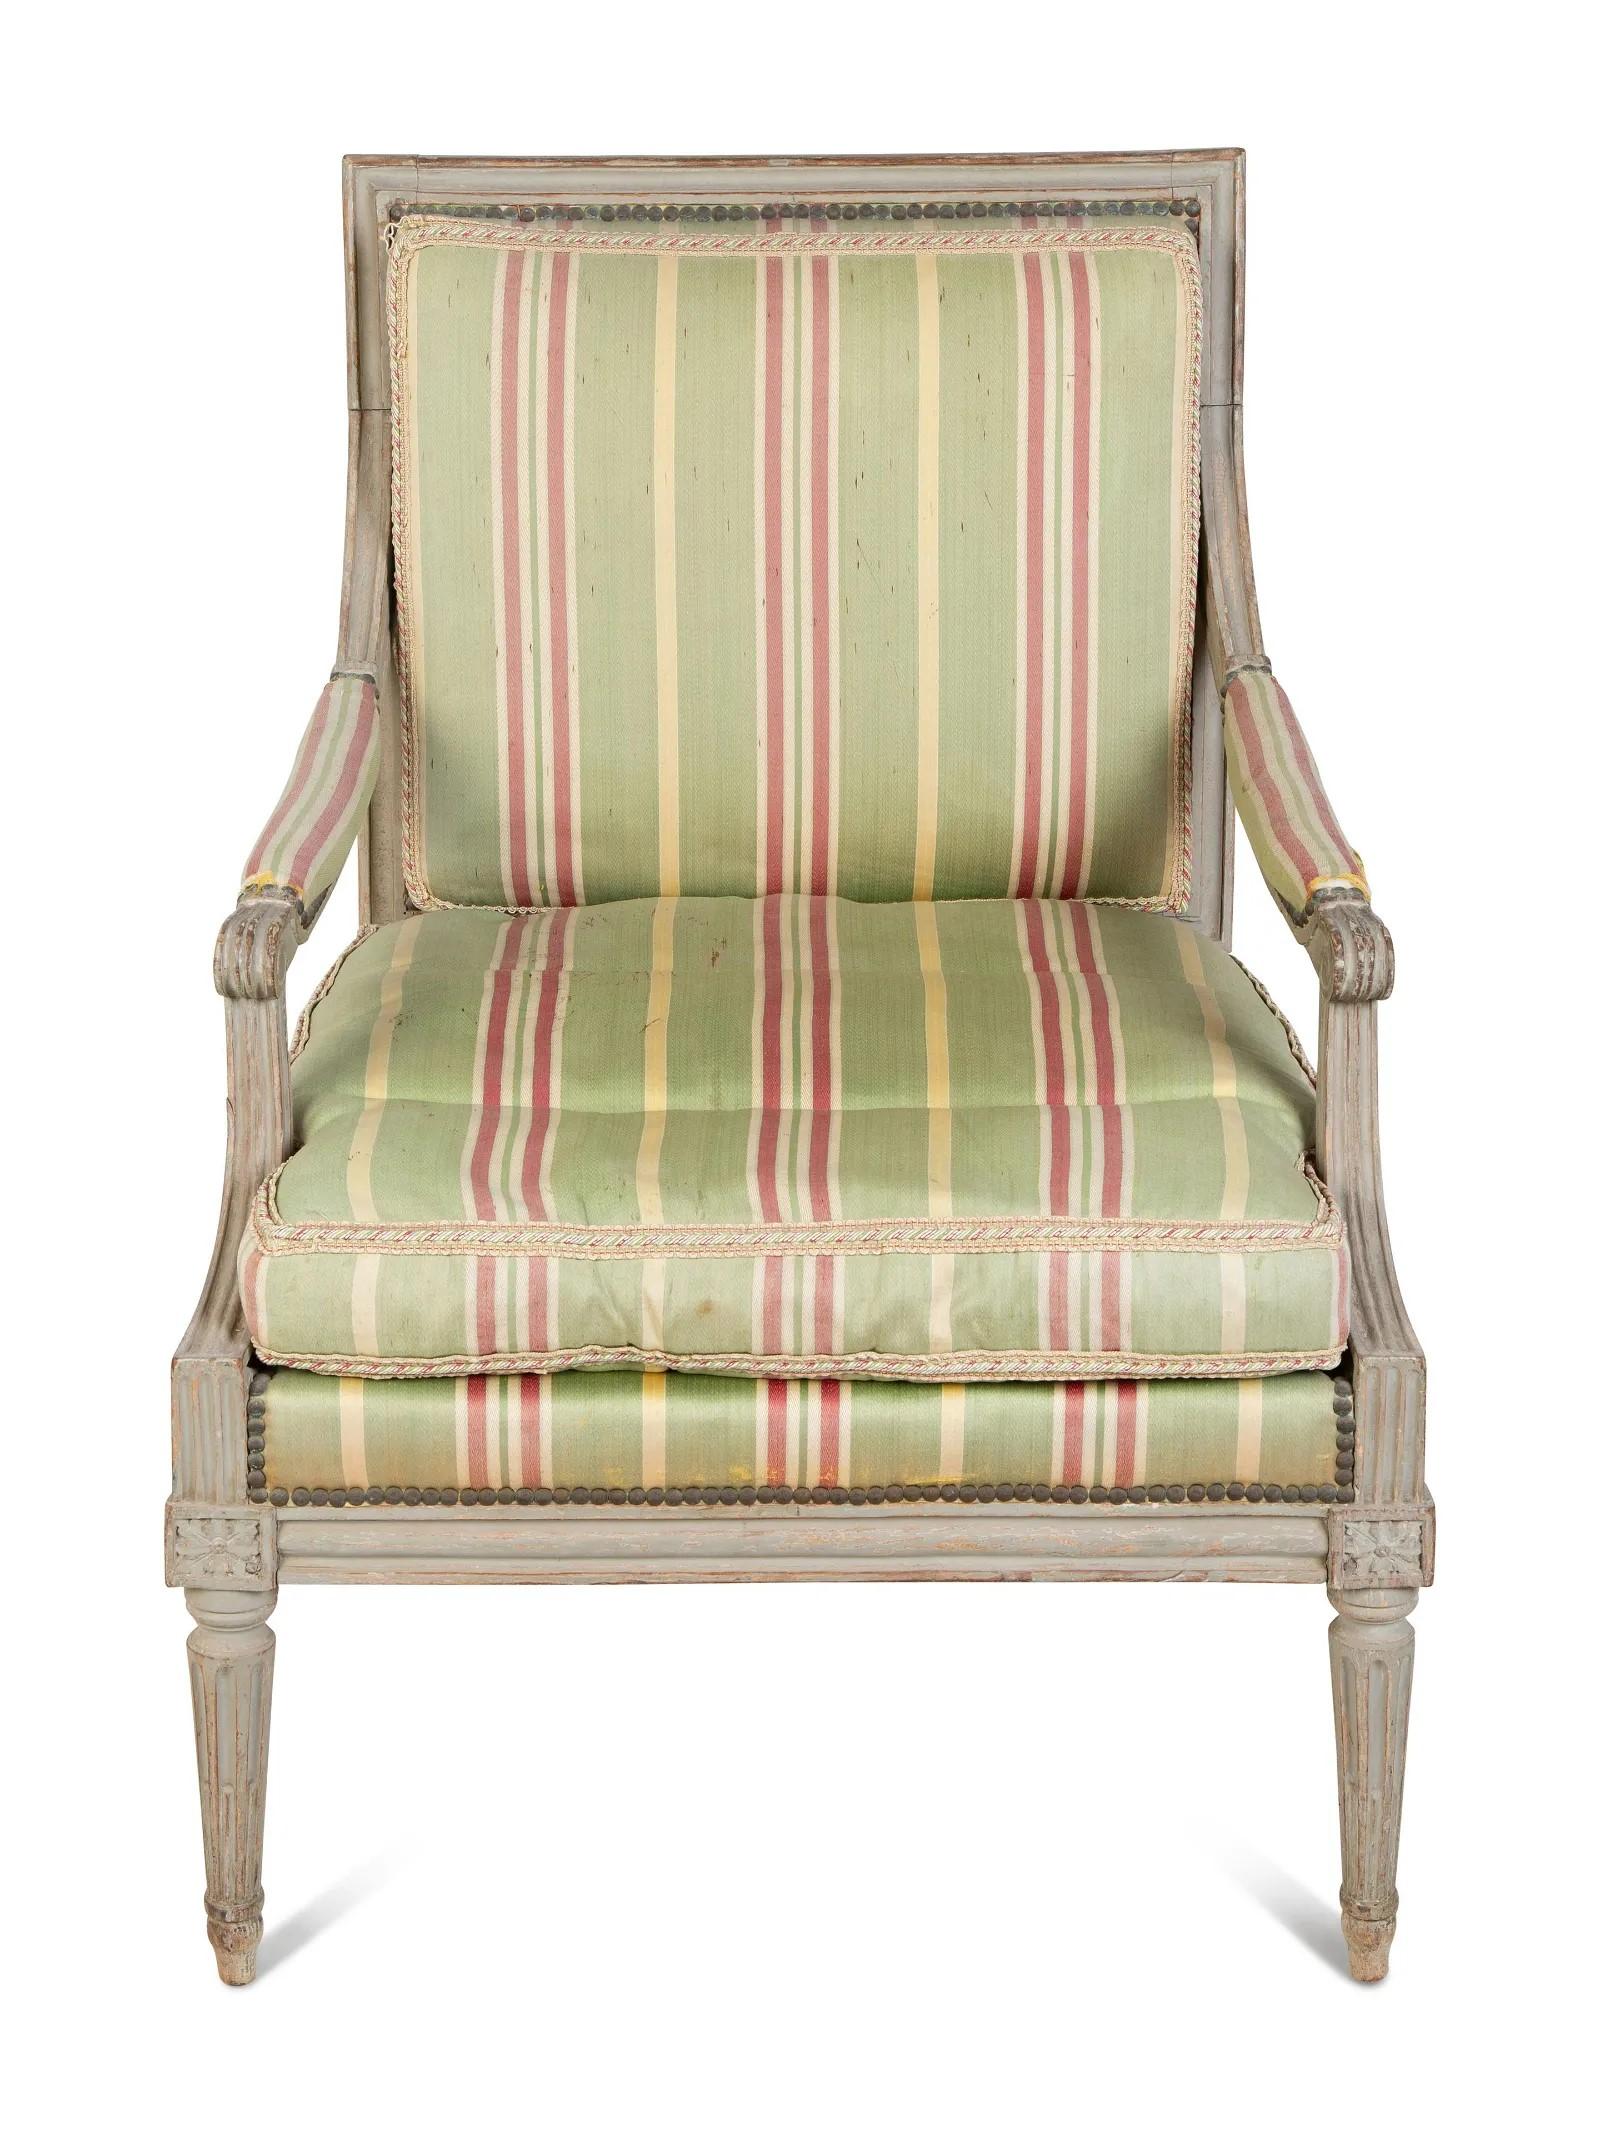 A fine Louis XVI painted fauteuil, French circa 1780, with upholstered seat and back, with molded frame and tapering fluted lags, pegged construction. Great patina.